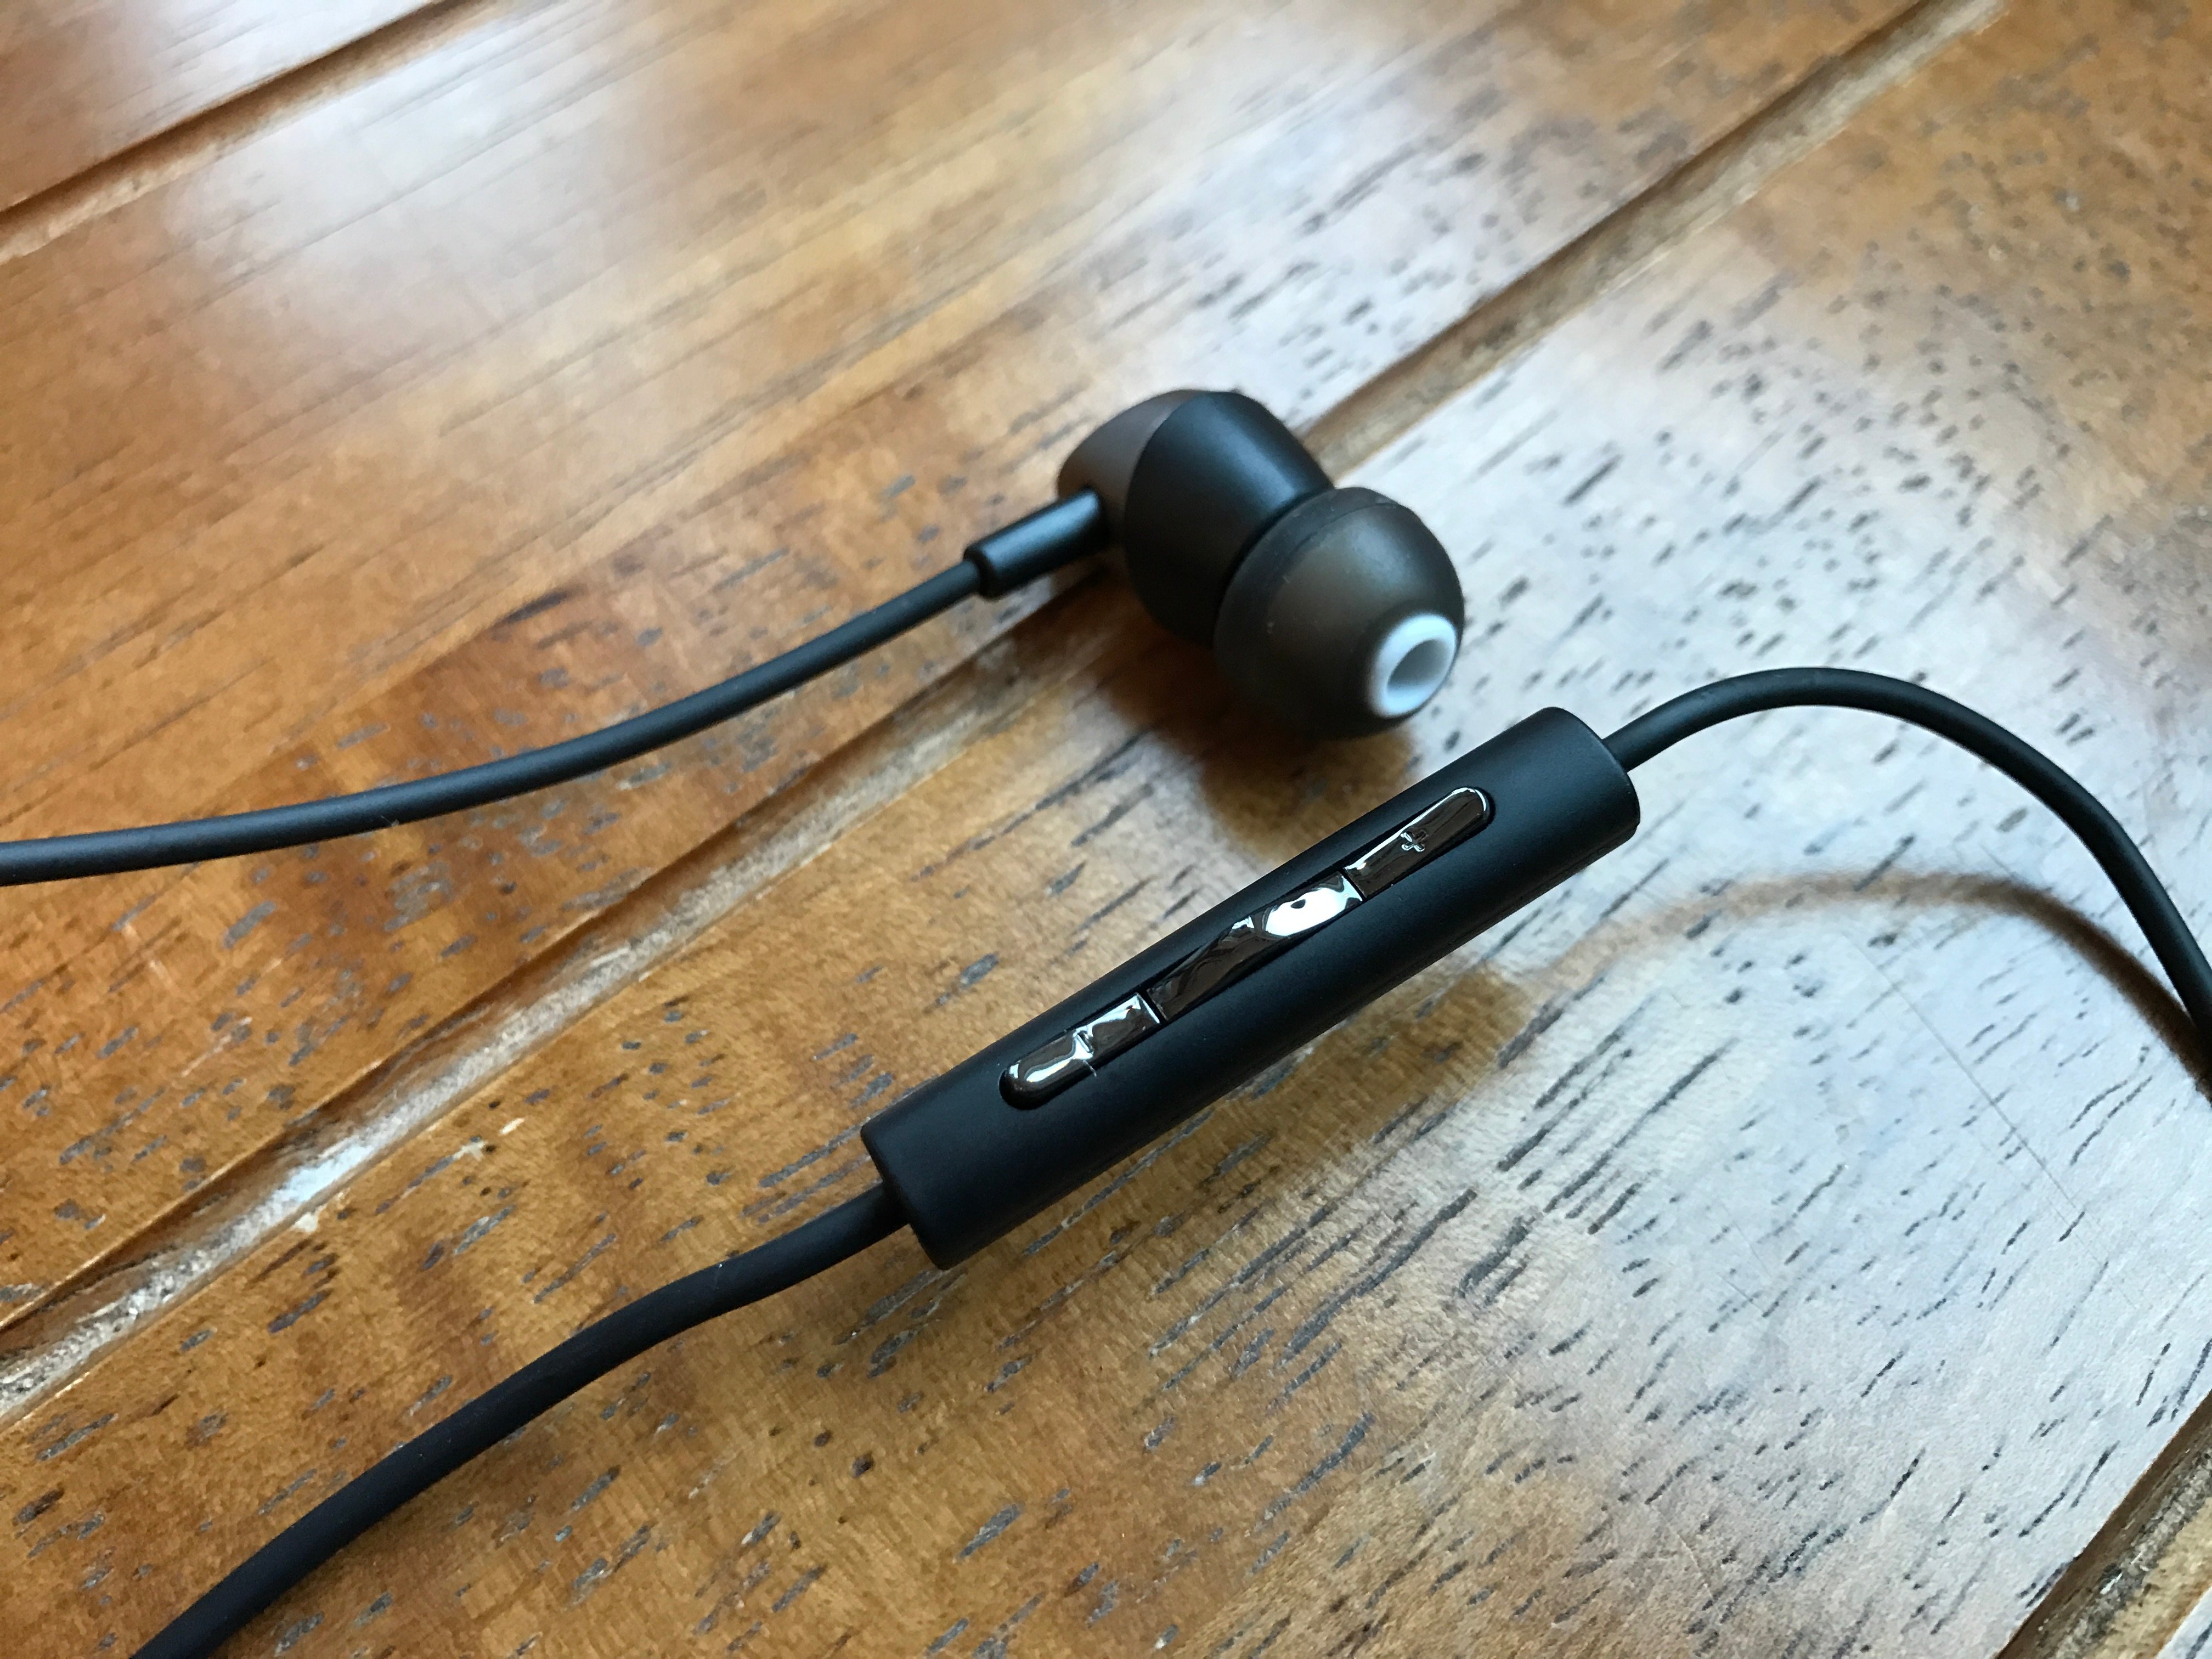 Th earbuds are comfortable and the in-line control is easy to use.